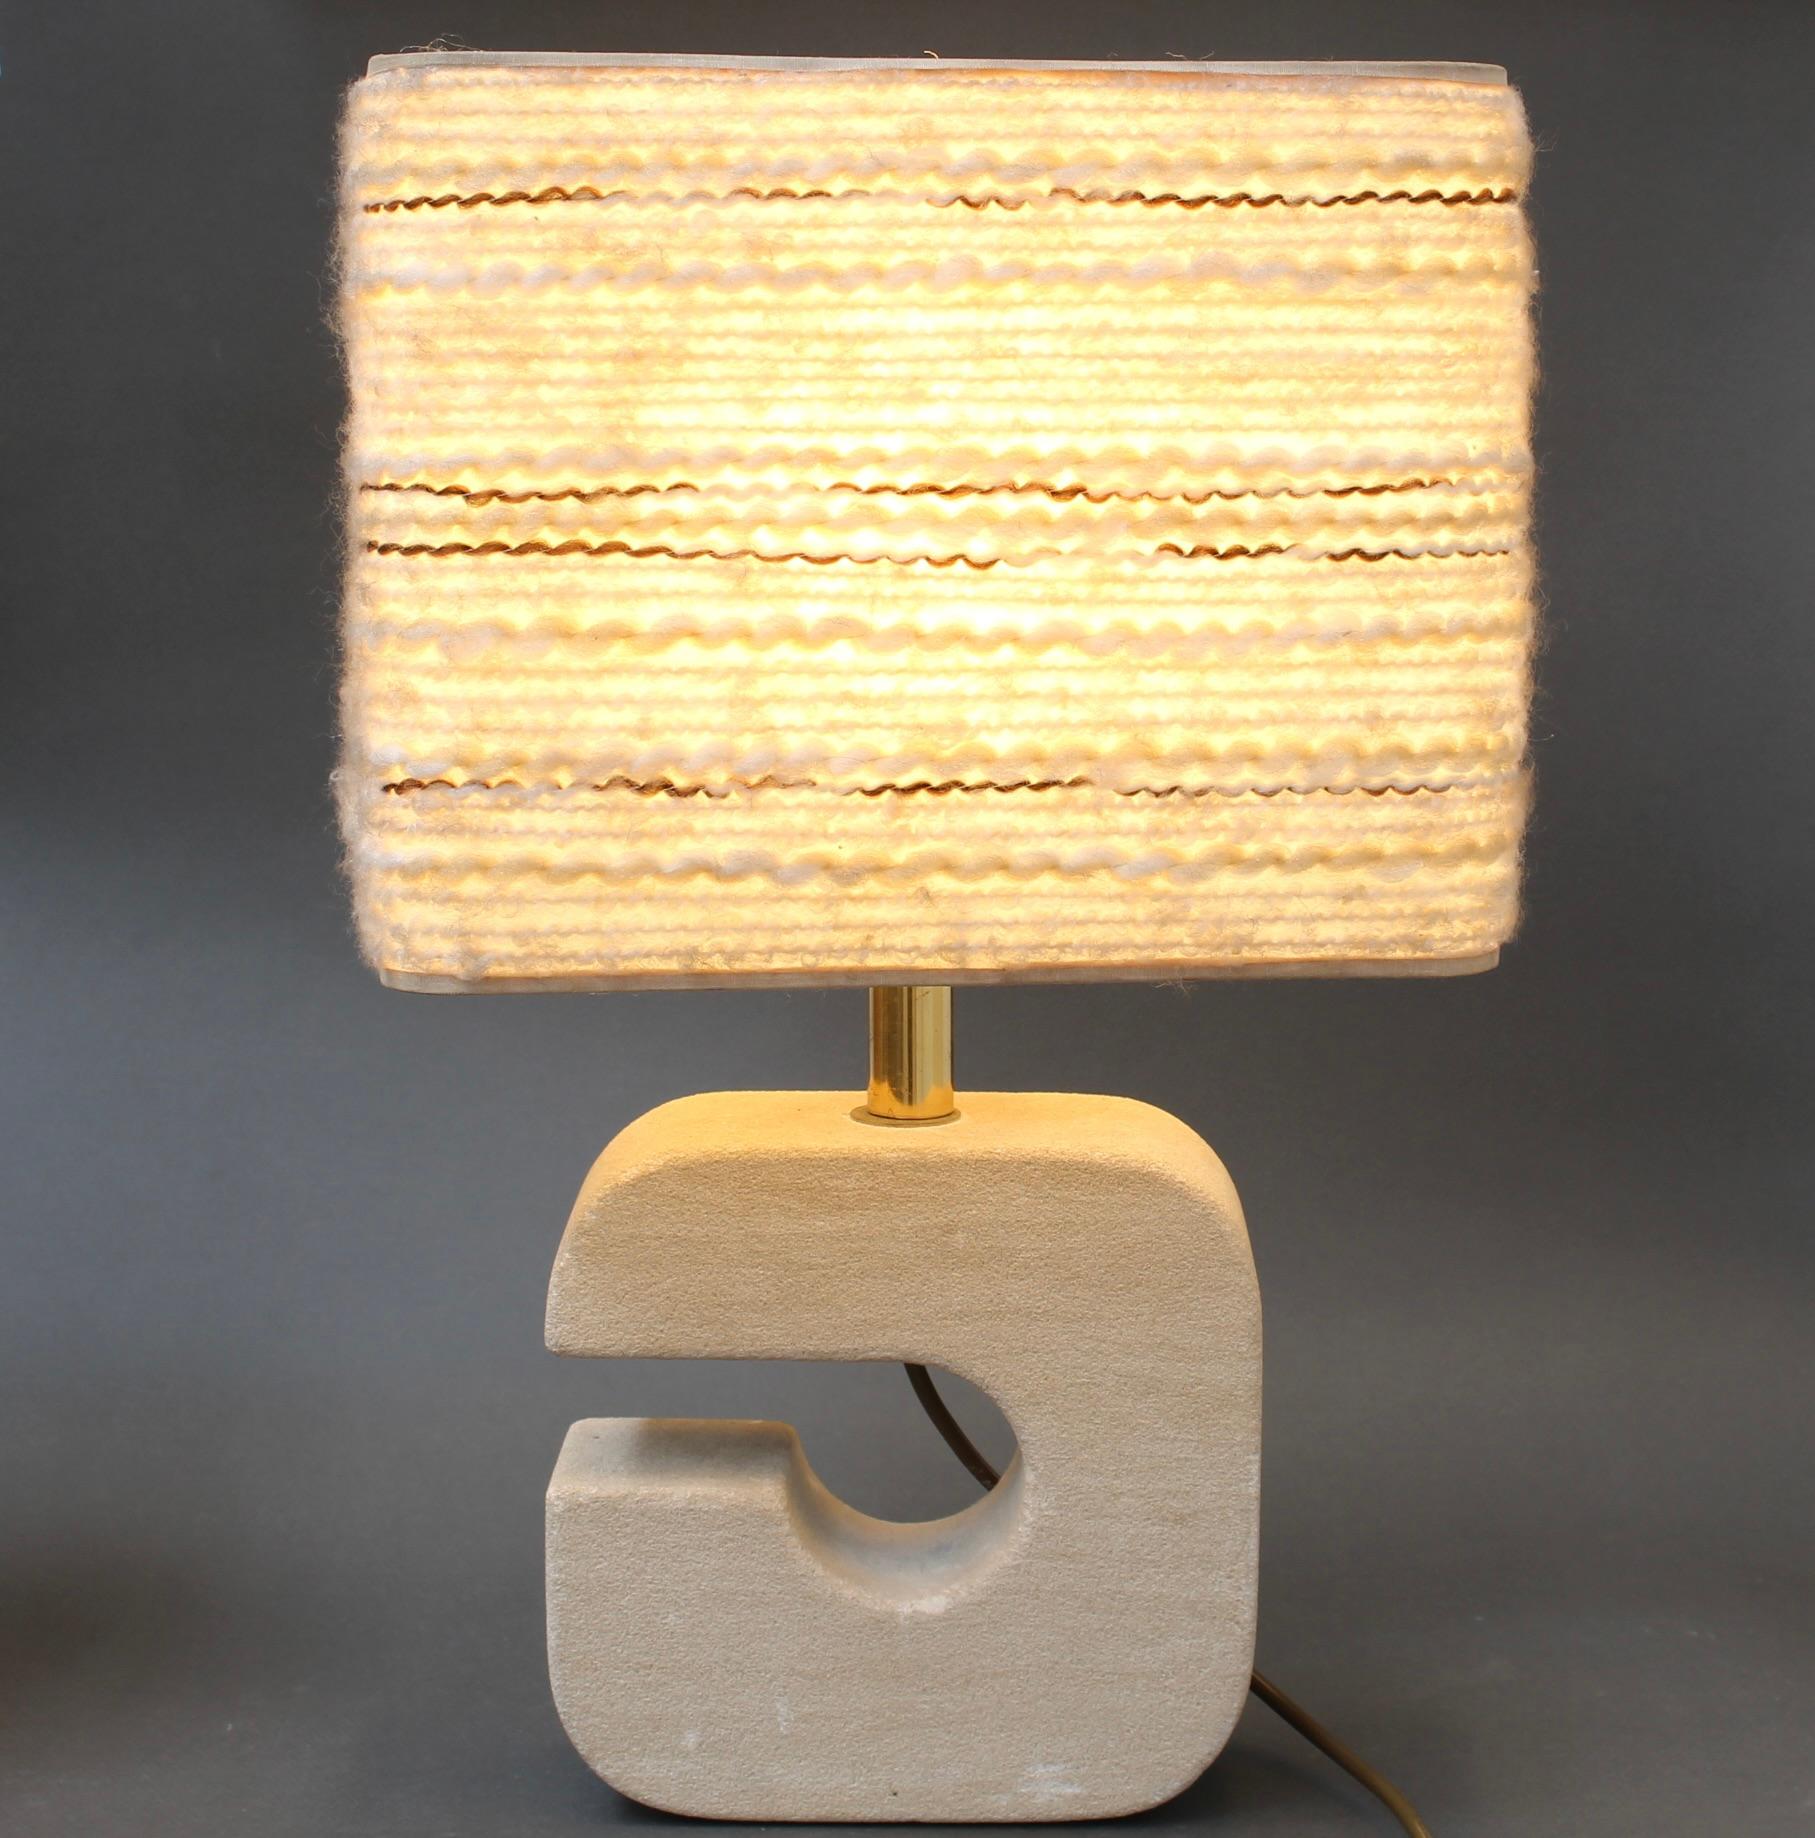 Vintage Italian travertine table lamp (circa 1970s). Travertine is a natural sedimentary rock that is most often found in Italy and used in architecture and indoor decoration. The stone has a timeless appeal and beauty with which few materials can